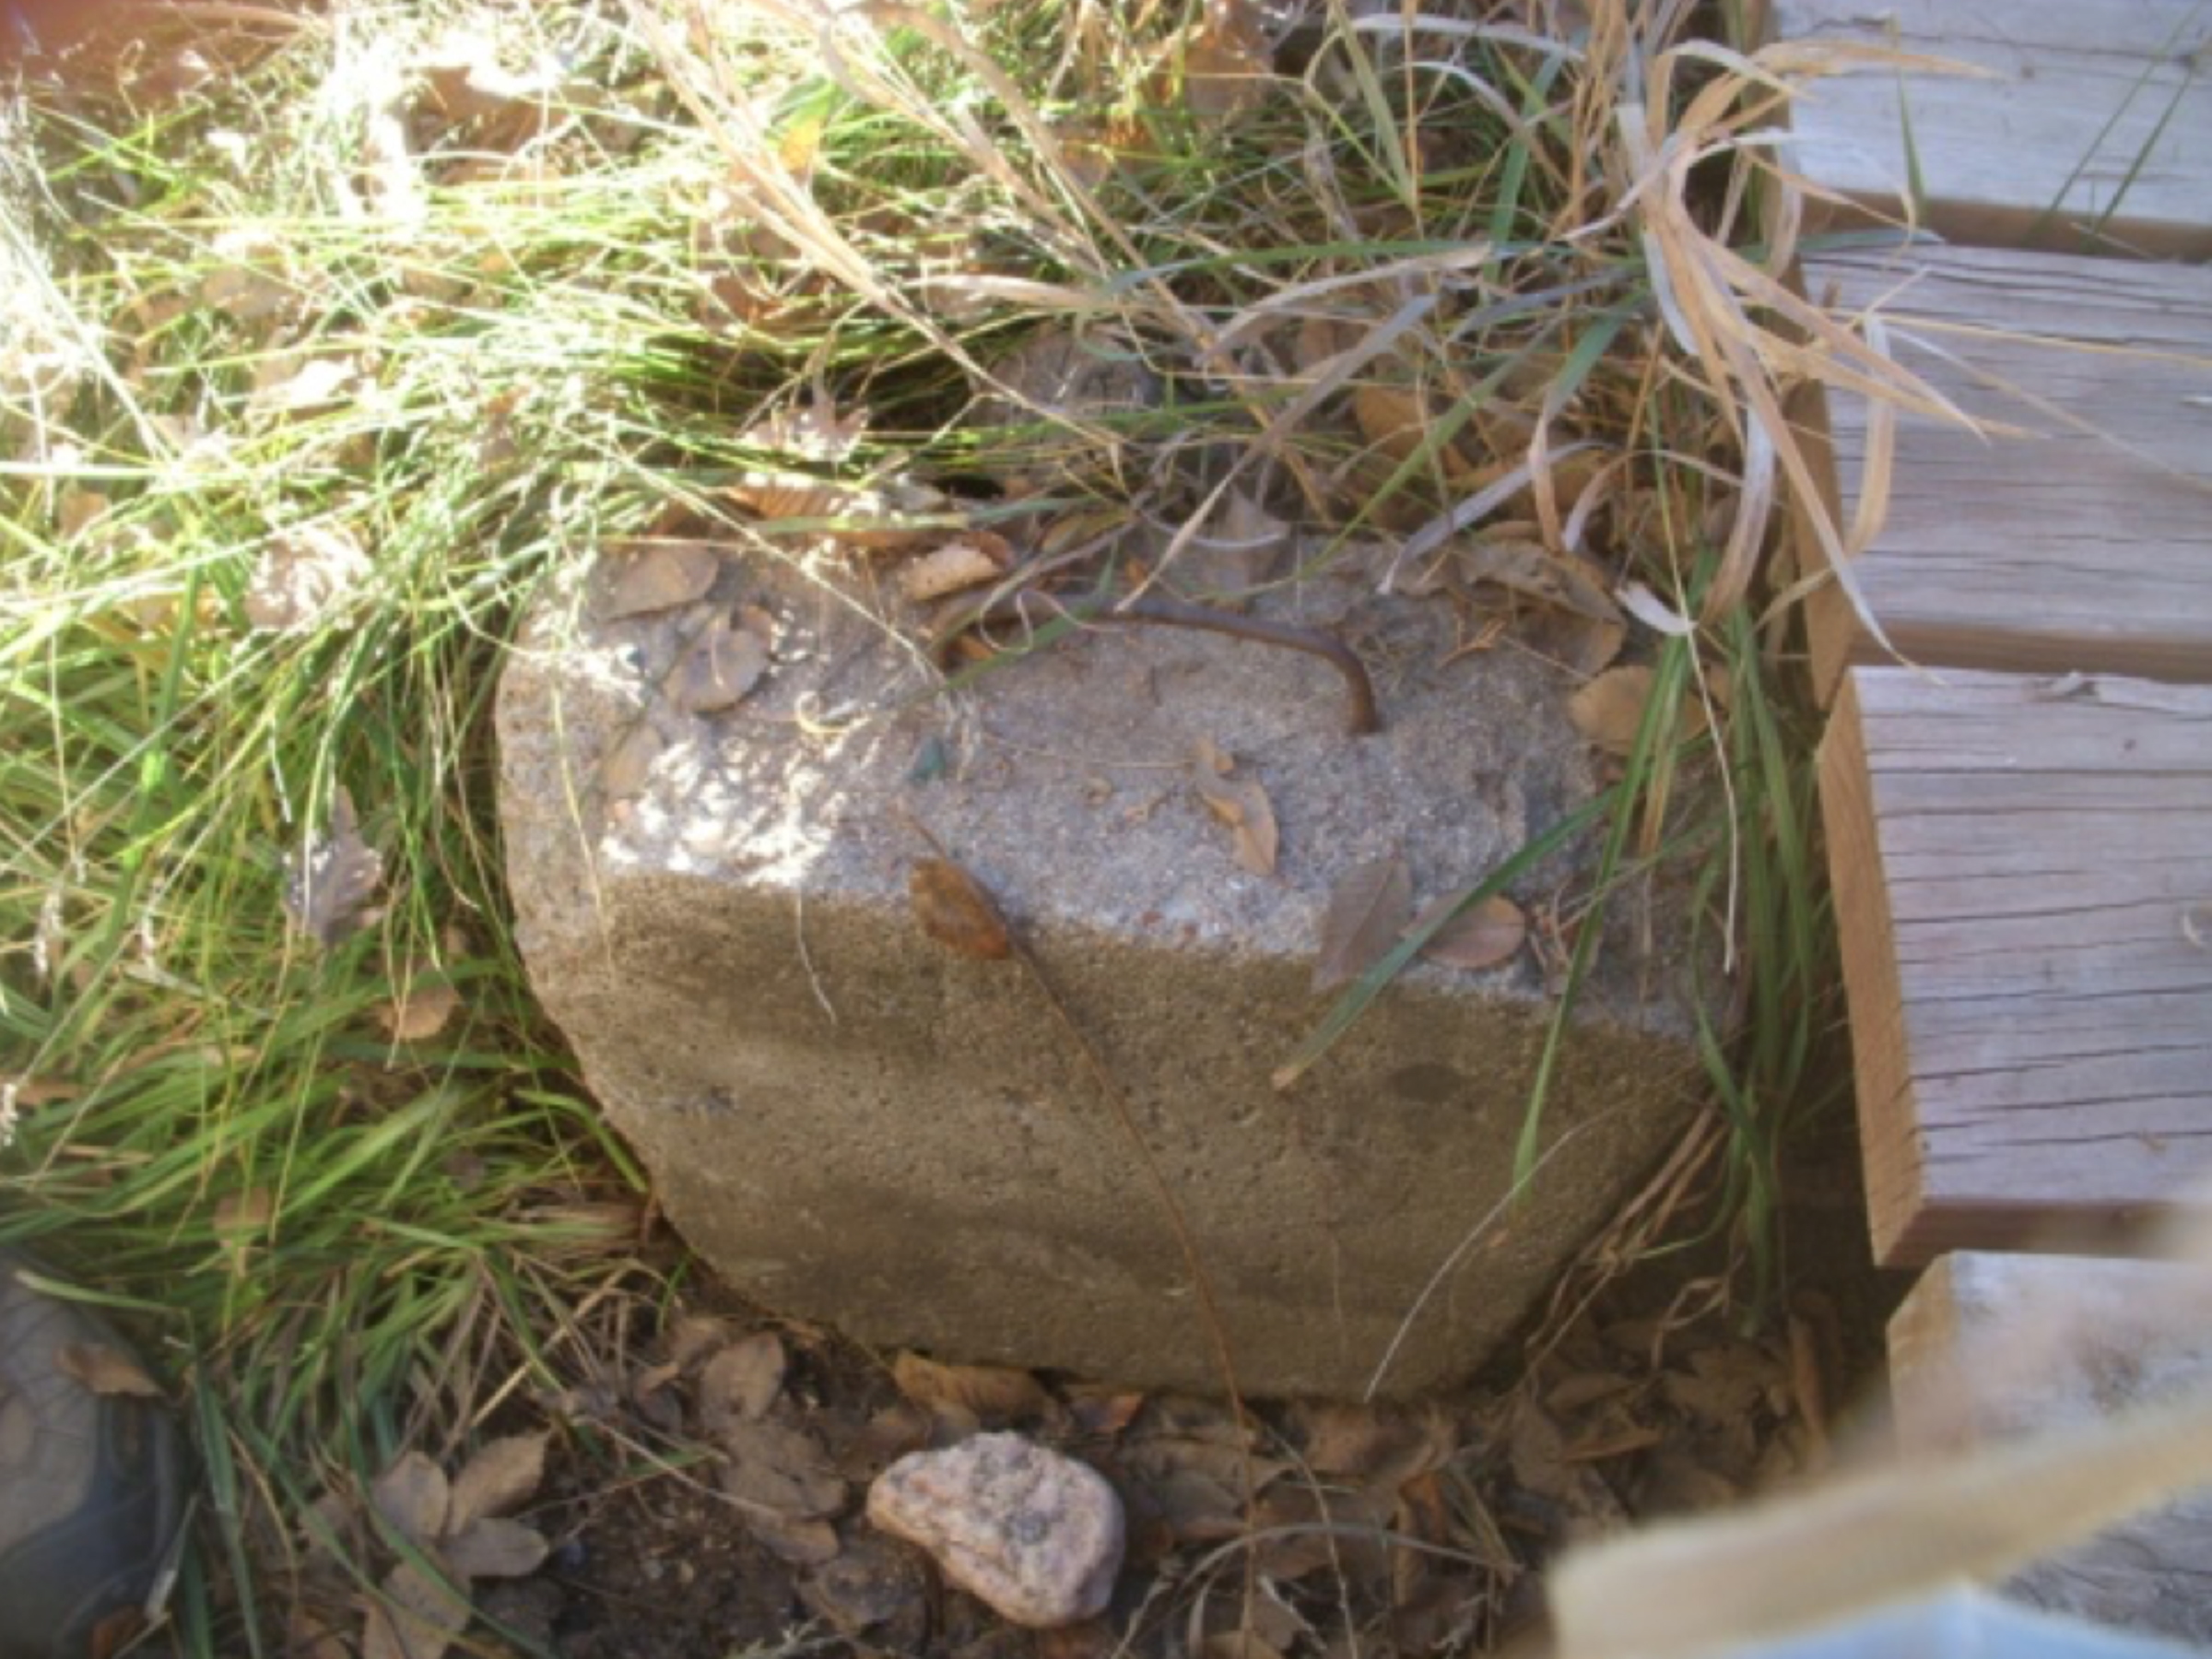   A concrete plug once used to control diversion into a former lateral.  photo by the Deborah and Jon Lawrence   